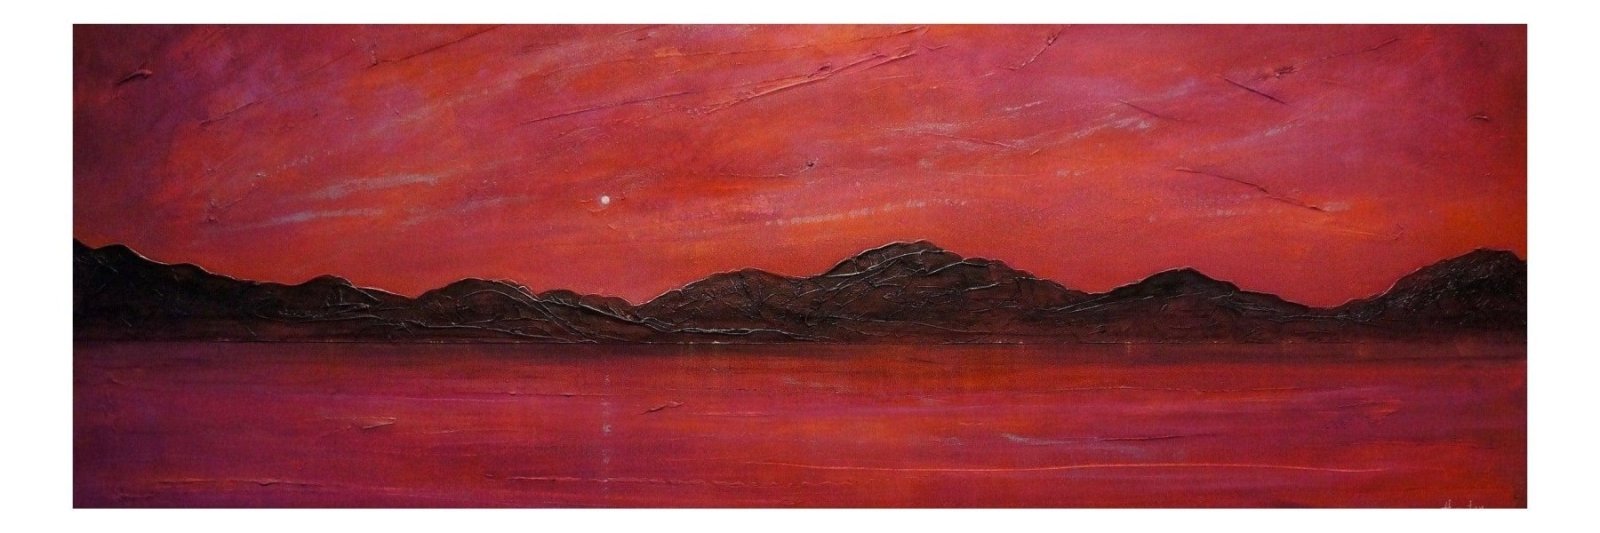 Clyde Silver Moonlight-Panoramic Prints-River Clyde Art Gallery-Paintings, Prints, Homeware, Art Gifts From Scotland By Scottish Artist Kevin Hunter